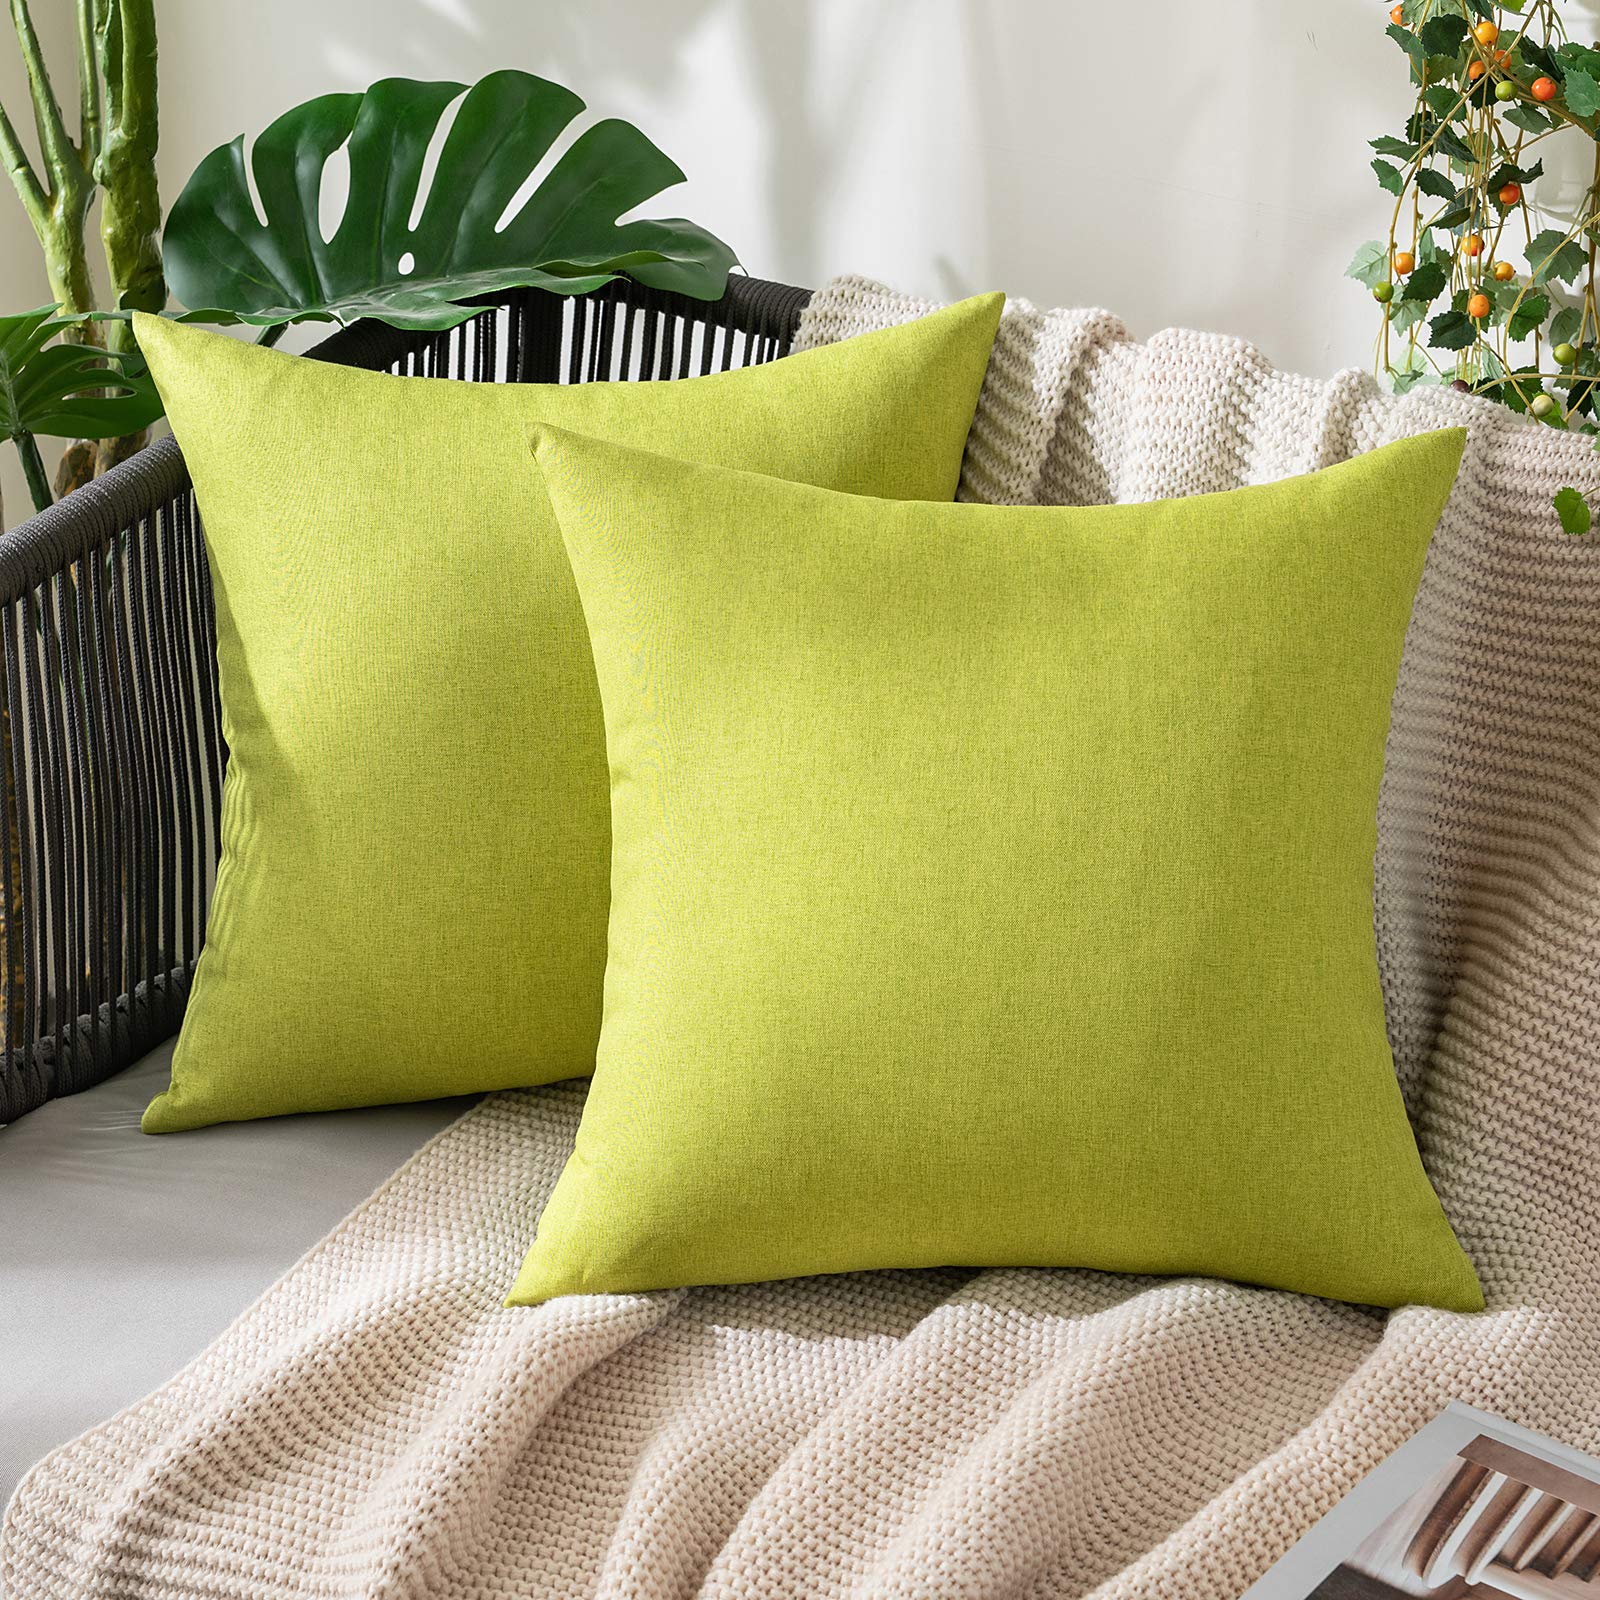 MIULEE Waterproof Outdoor Cushion Covers 20x20 Inches Set of 2 Water Resistant Decorative Throw Pillow Covers Outside for Garden Furniture Patio Couch Sofa Bed Linen Balcony, 50x50cm Green